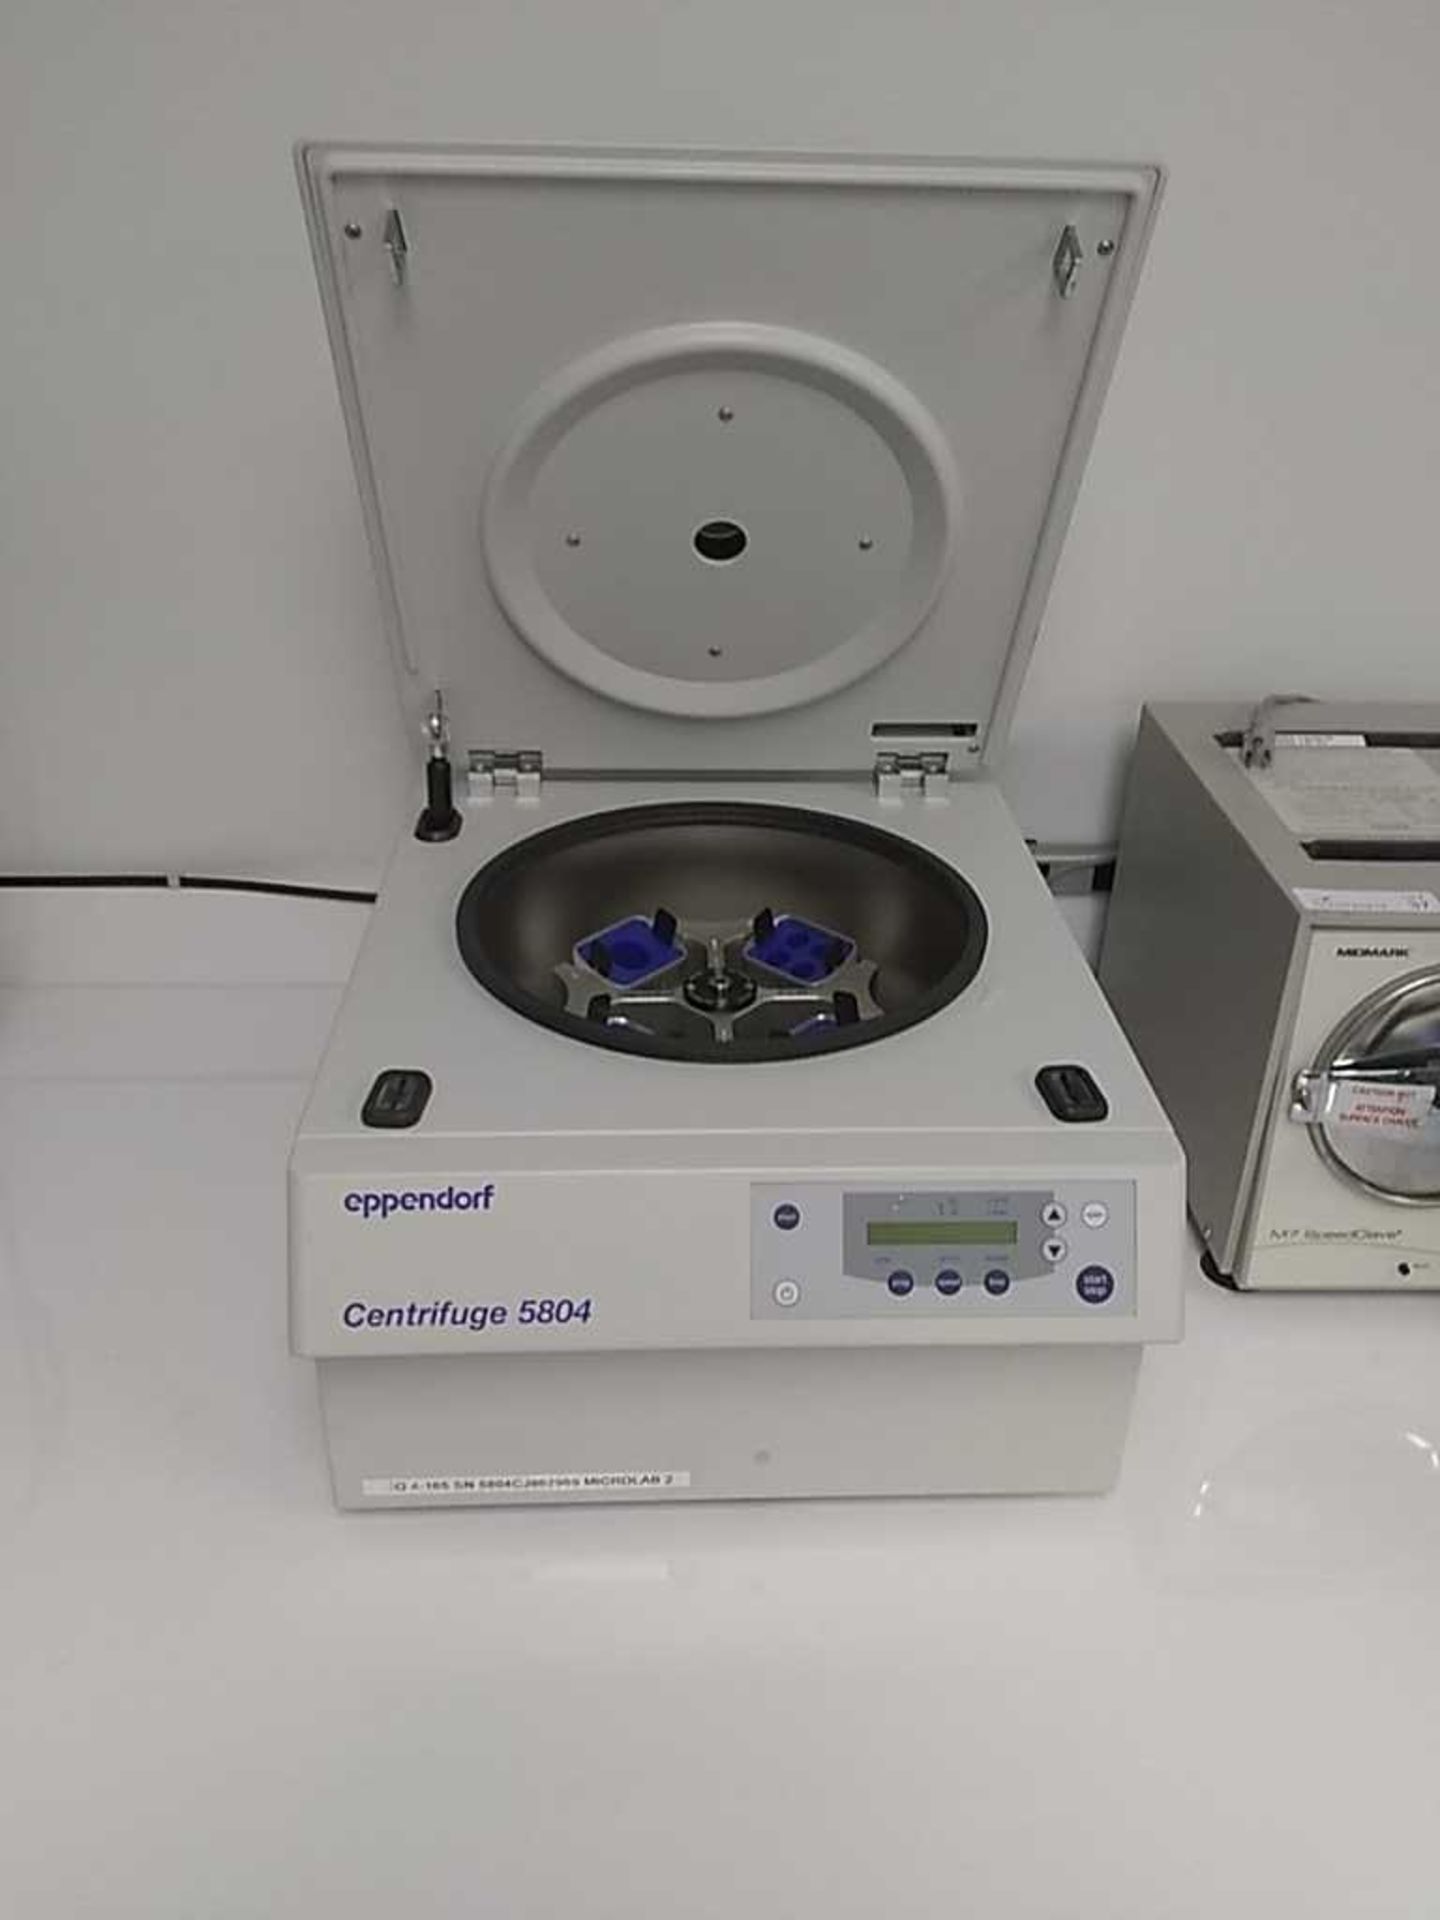 Eppendorf 5804 Benchtop Centrifuge With Rotor - Image 4 of 7